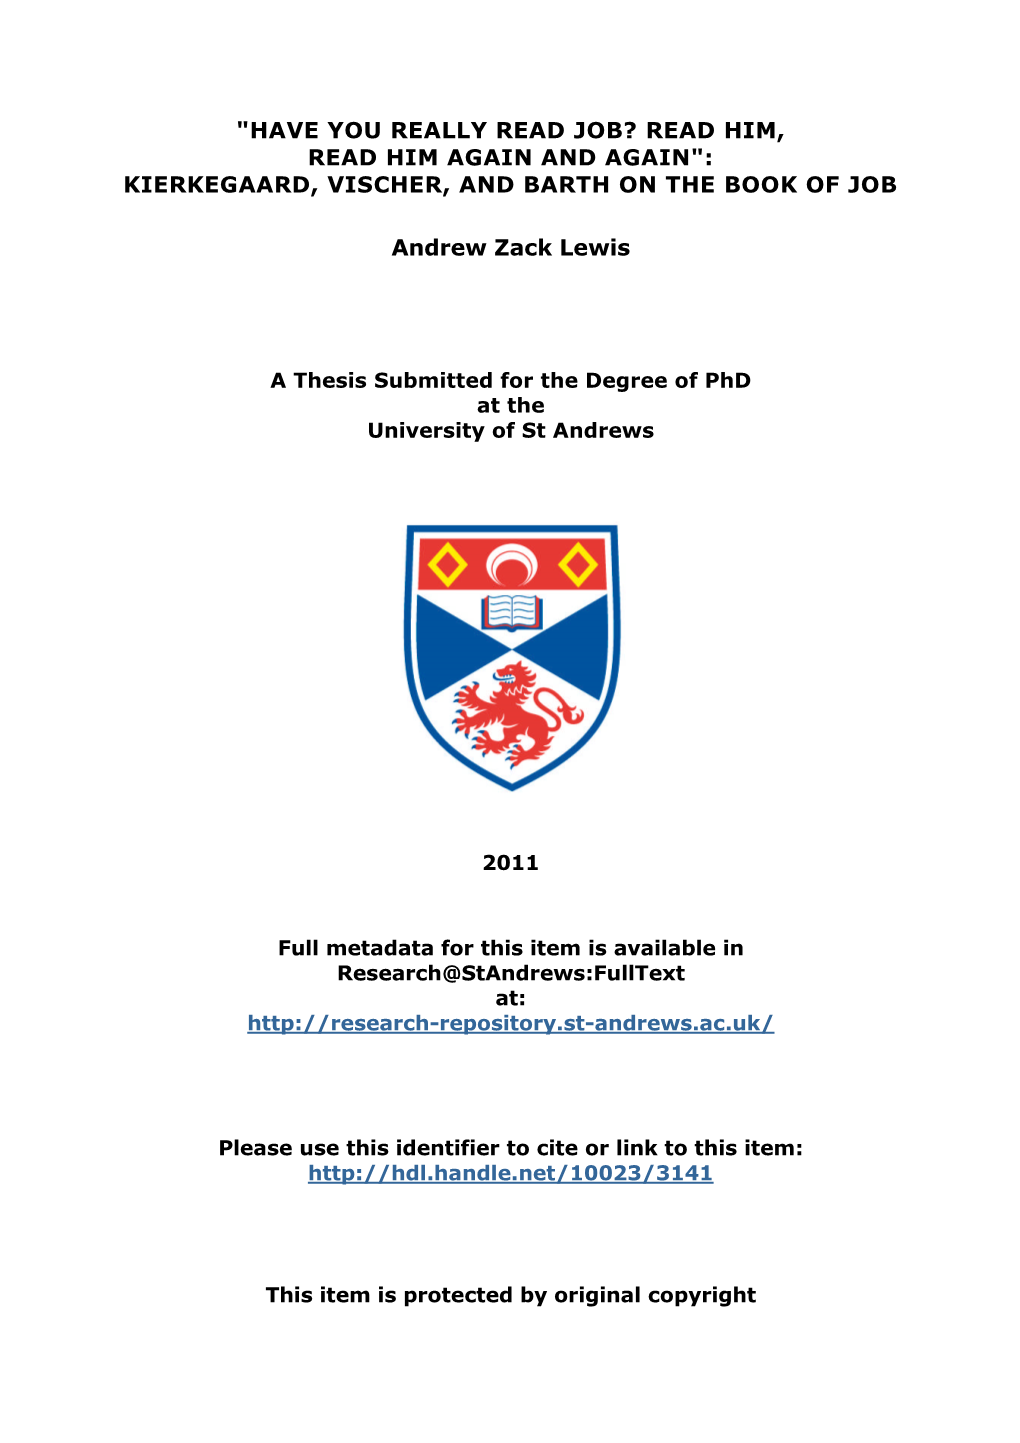 Andrew Z. Lewis Phd Thesis